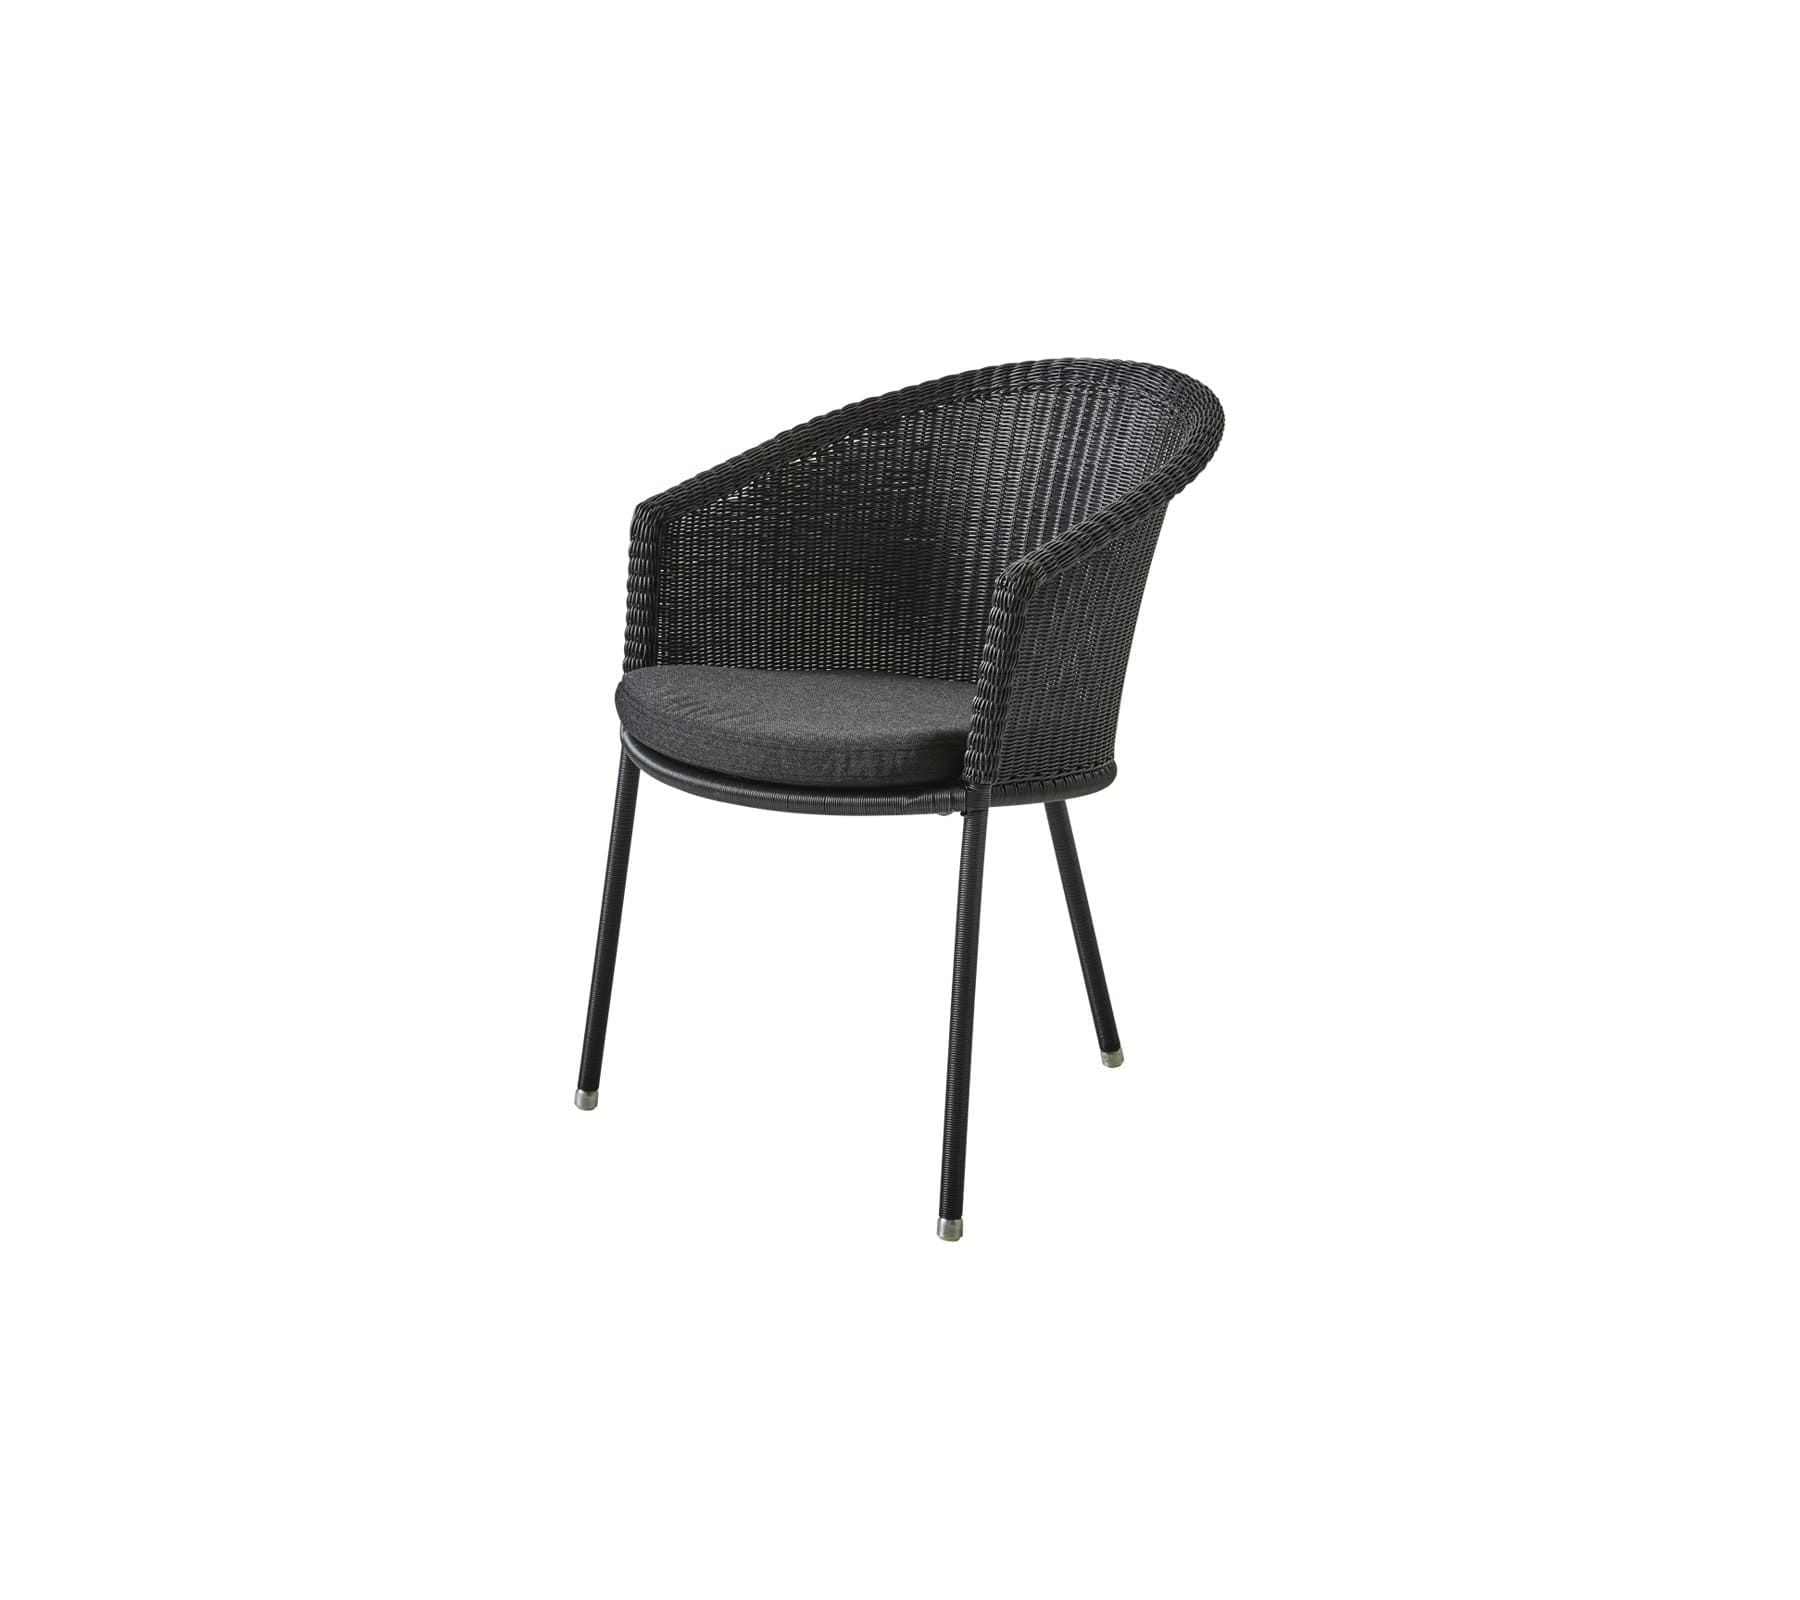  Boxhill's Trinity dark grey outdoor stackable chair with black cushion on white background